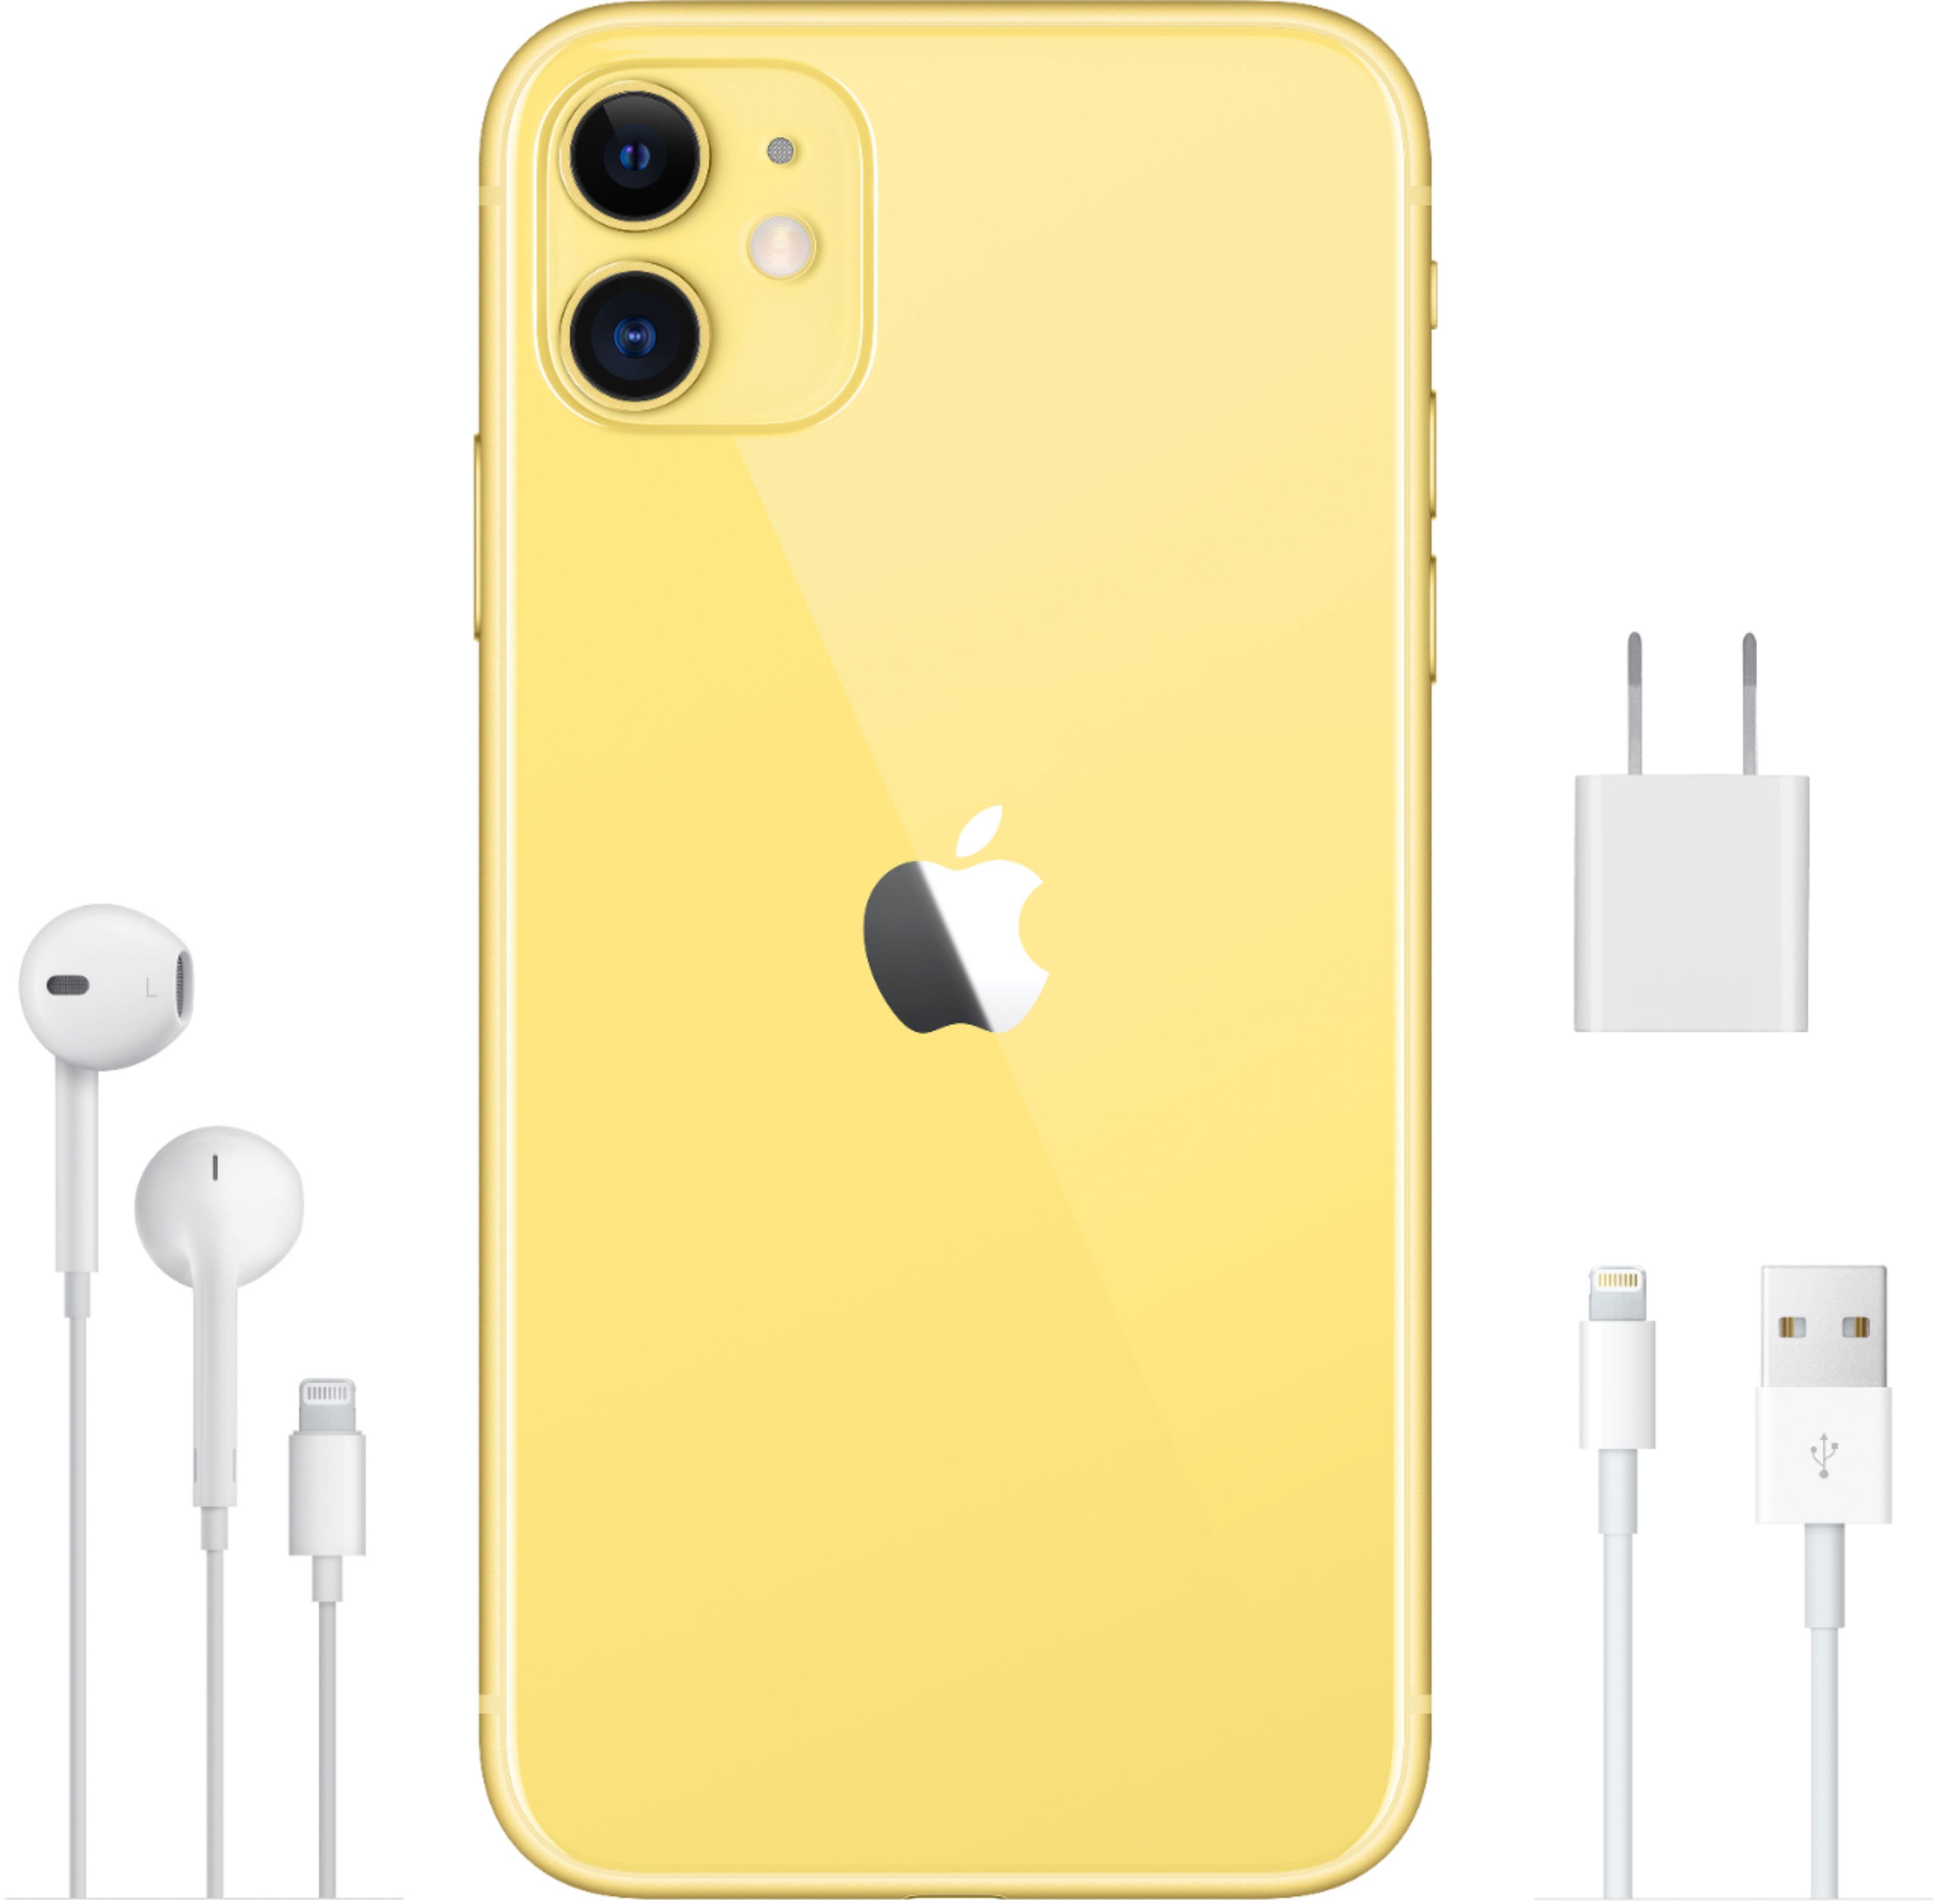 Best Buy: Apple iPhone 11 128GB Yellow (AT&T) MWLH2LL/A